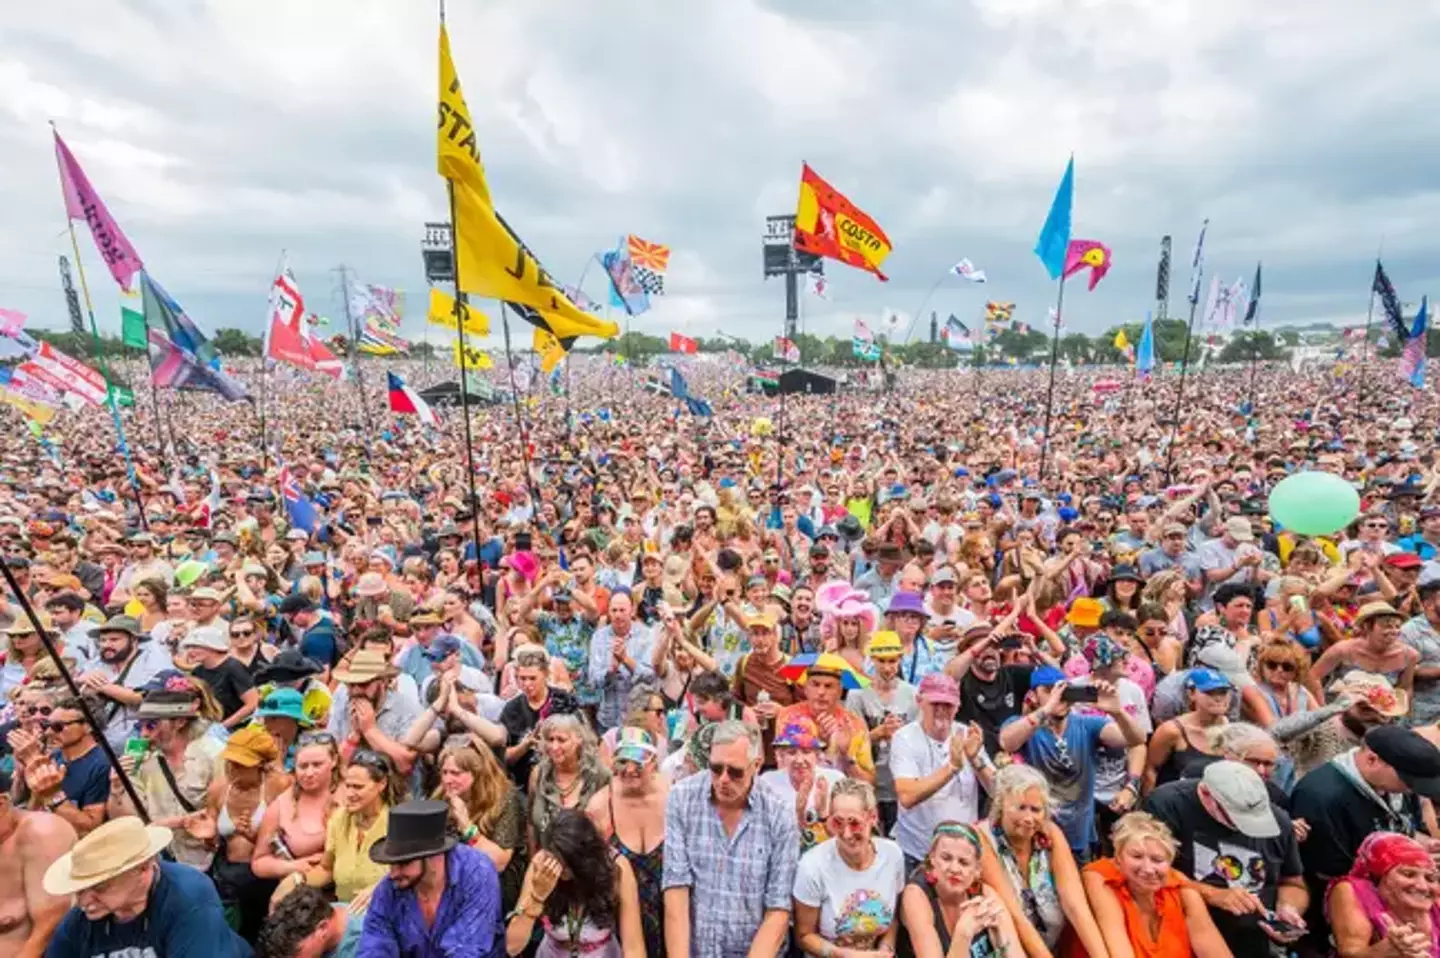 A Glastonbury worker in his 40s was found dead in his tent on Tuesday.